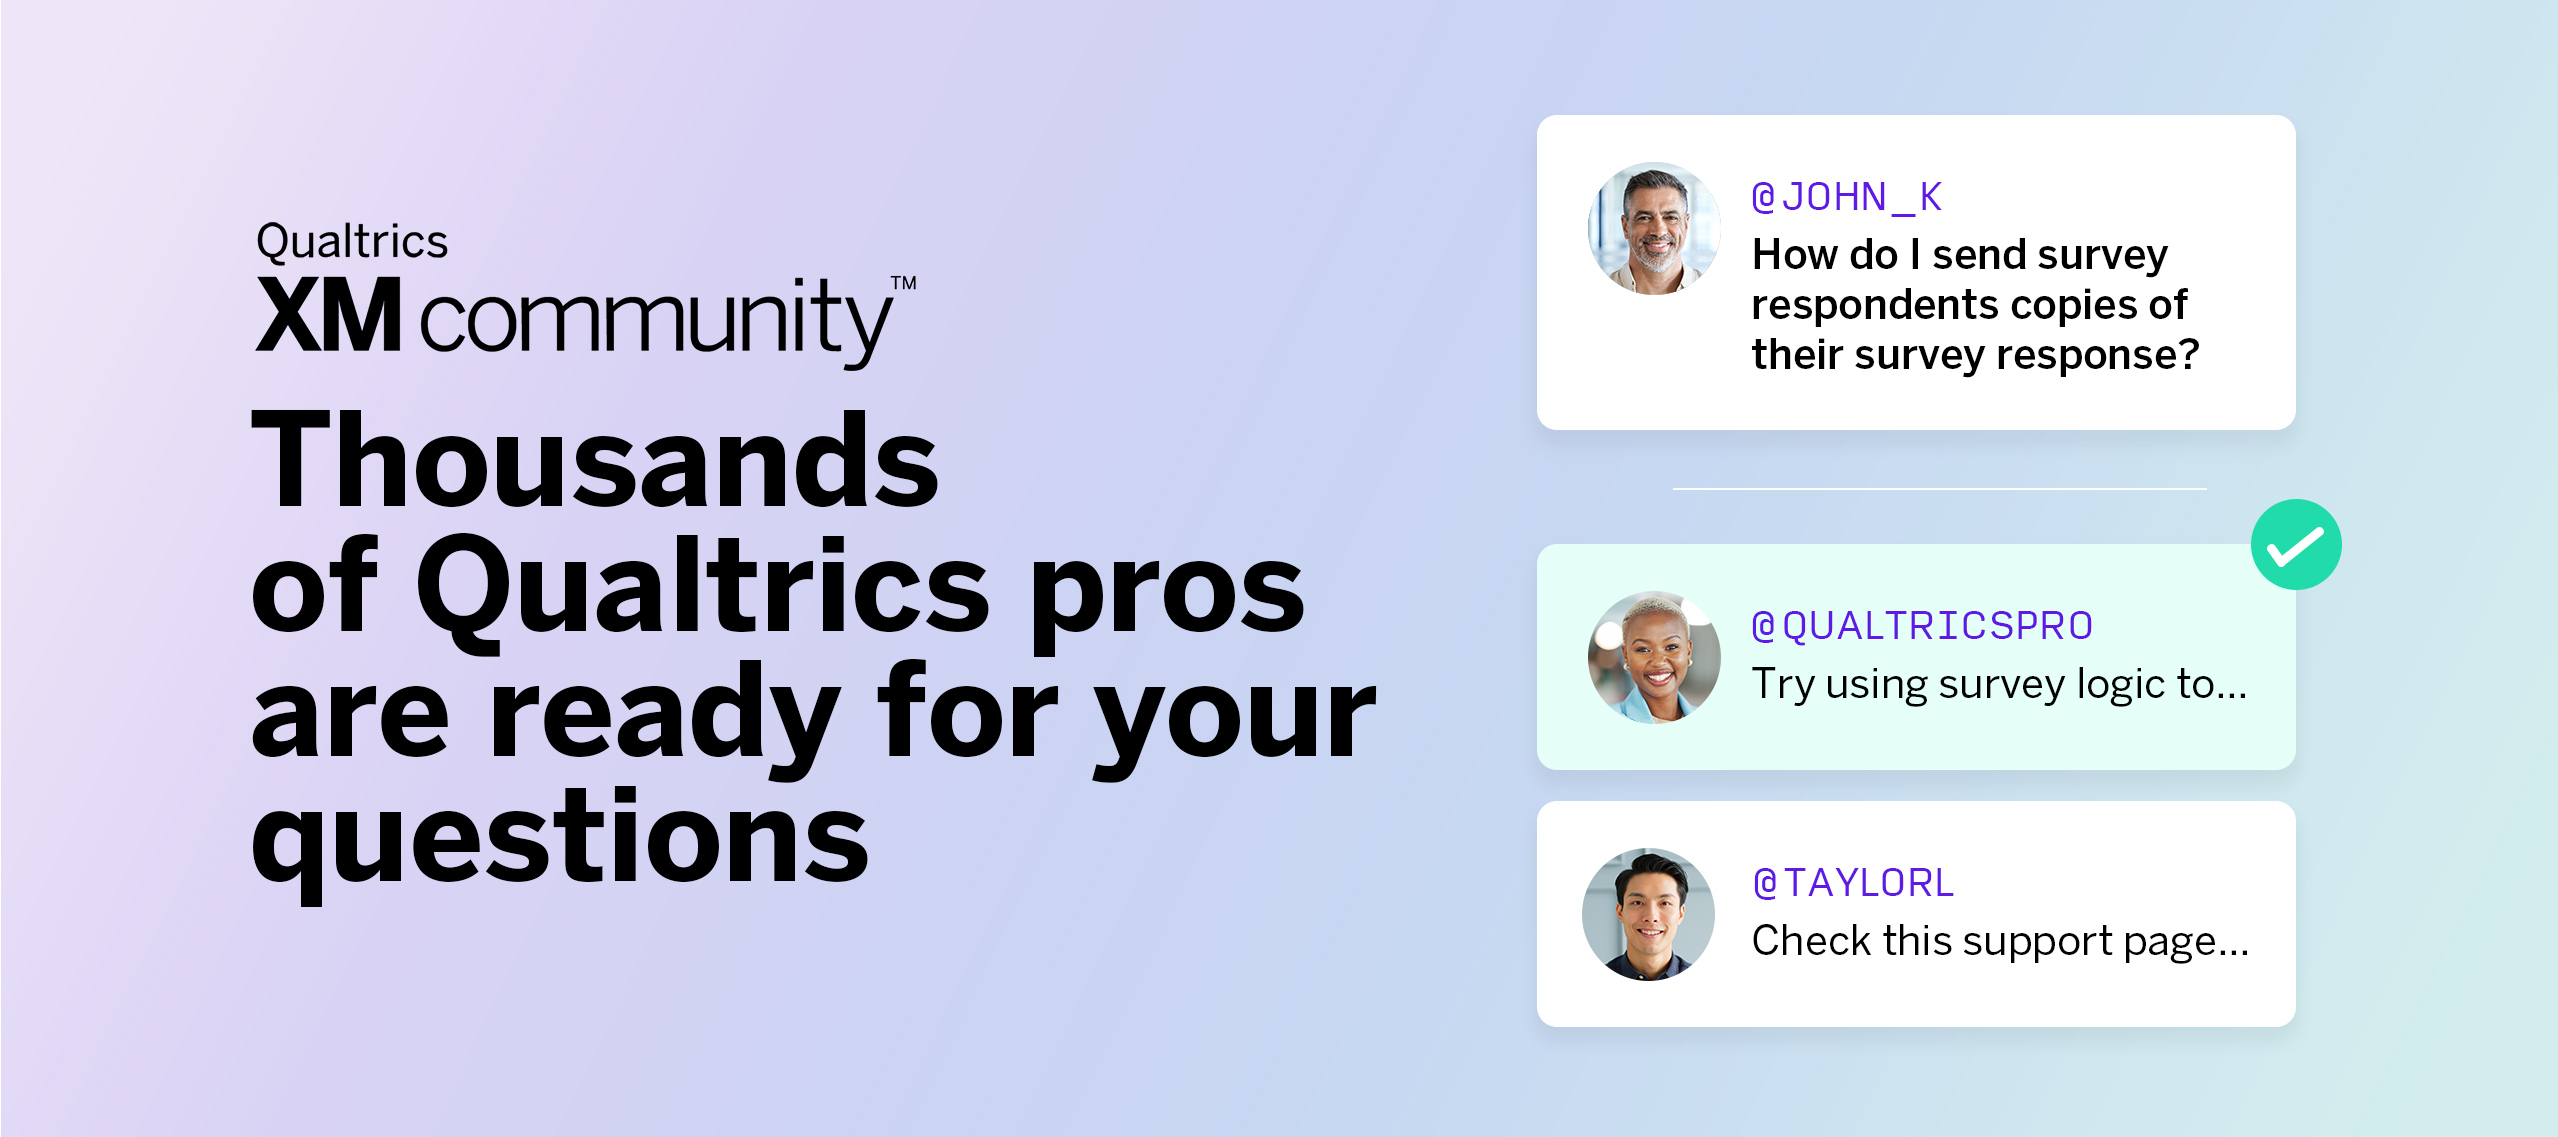 Don’t just visit the Qualtrics XM Community: Join our free Community